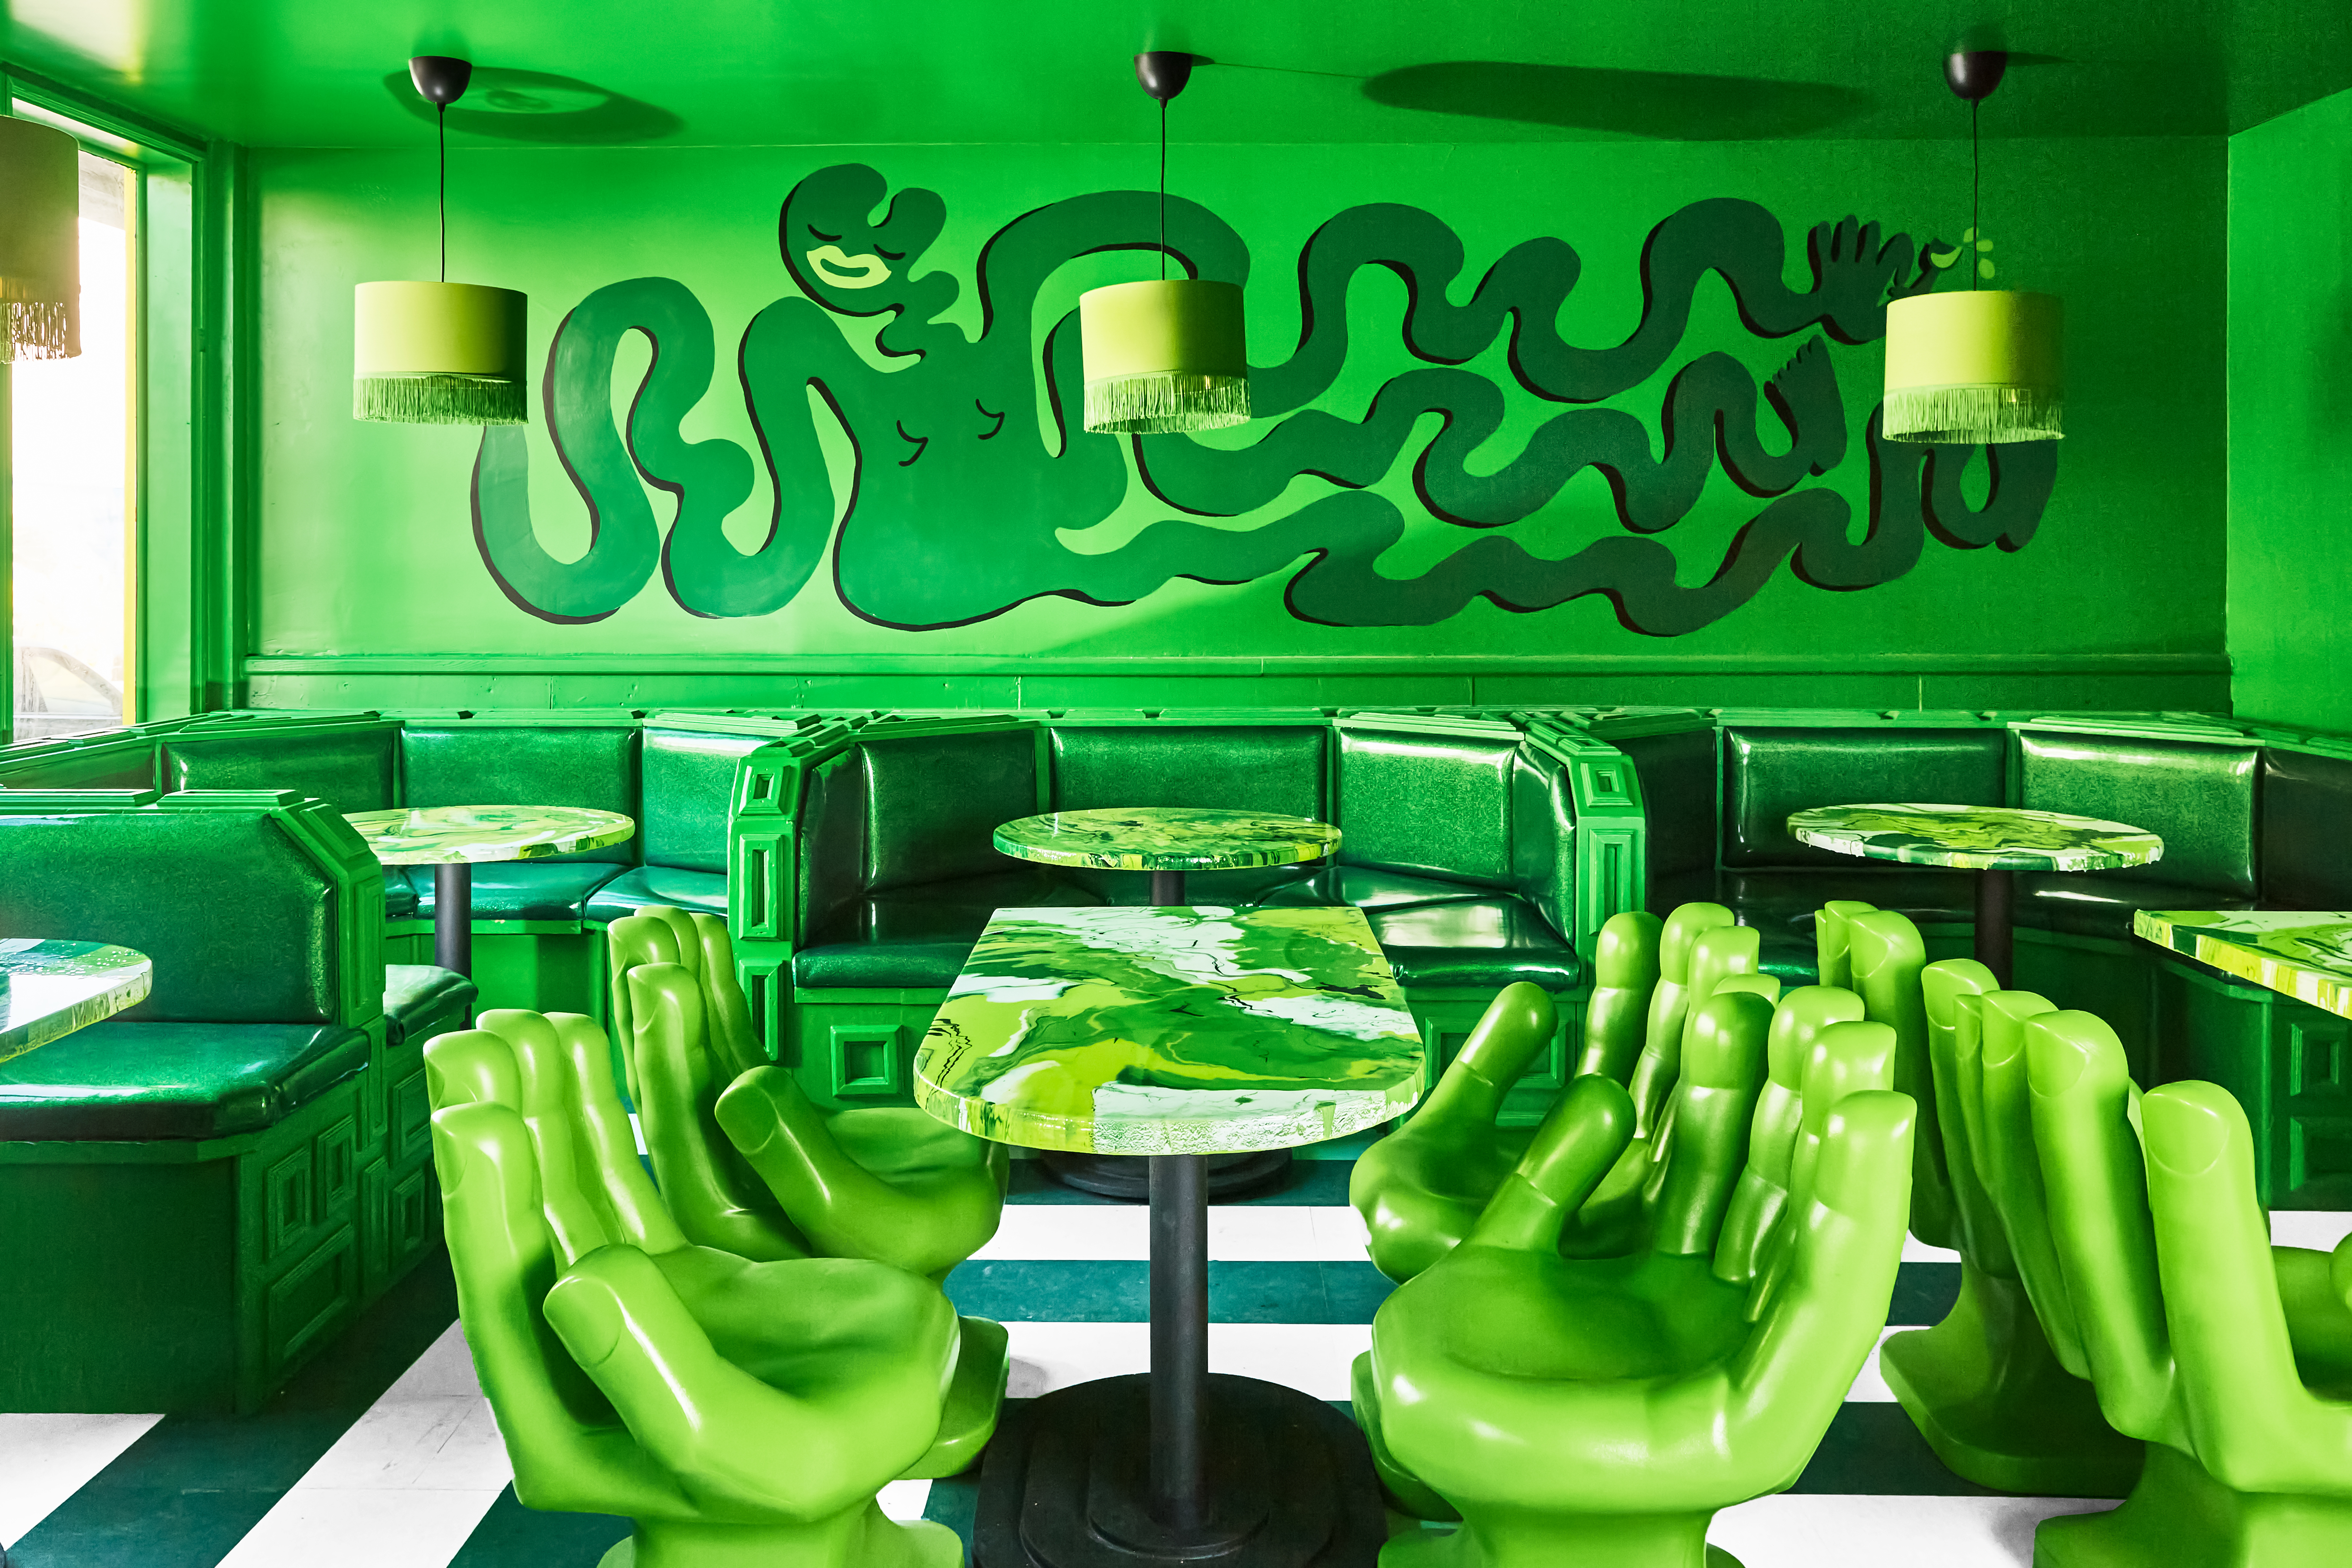 Bright green walls, green hand-shaped chairs, and green booths make up a boldly monochrome dining room.